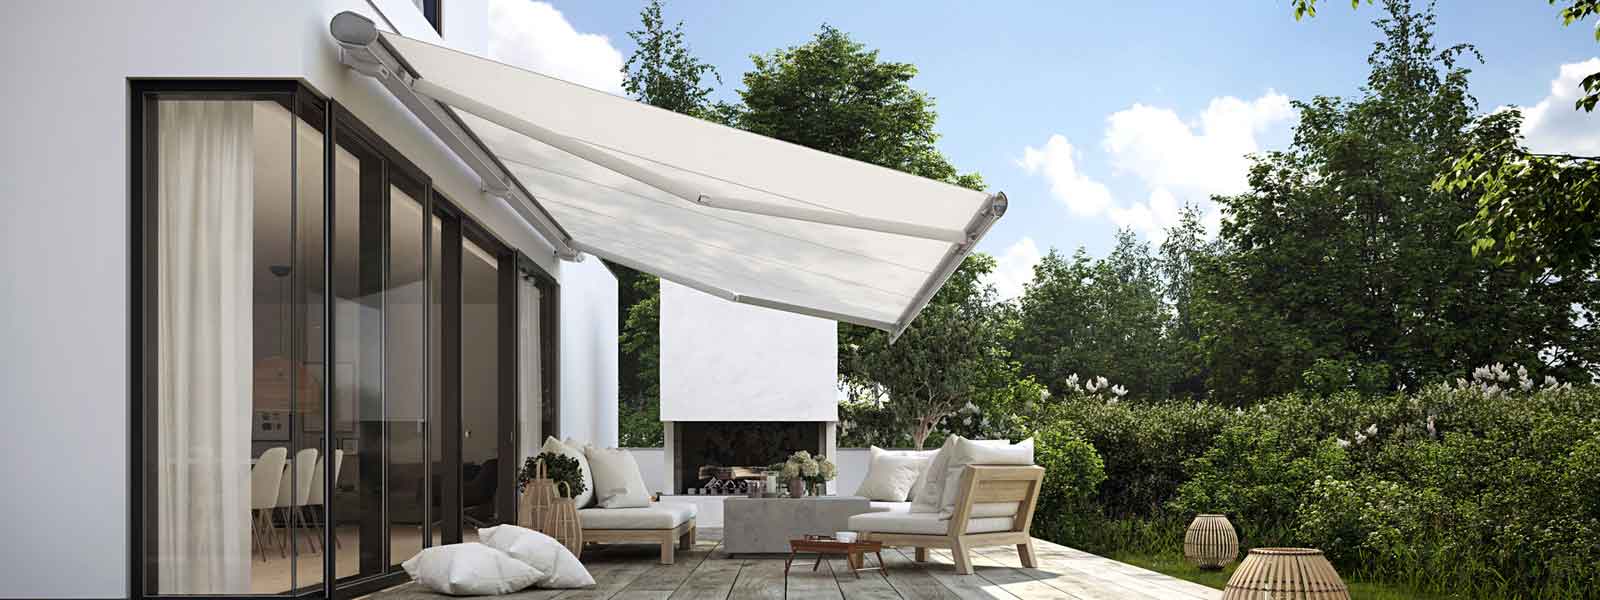 Markilux 6000 patio awnings